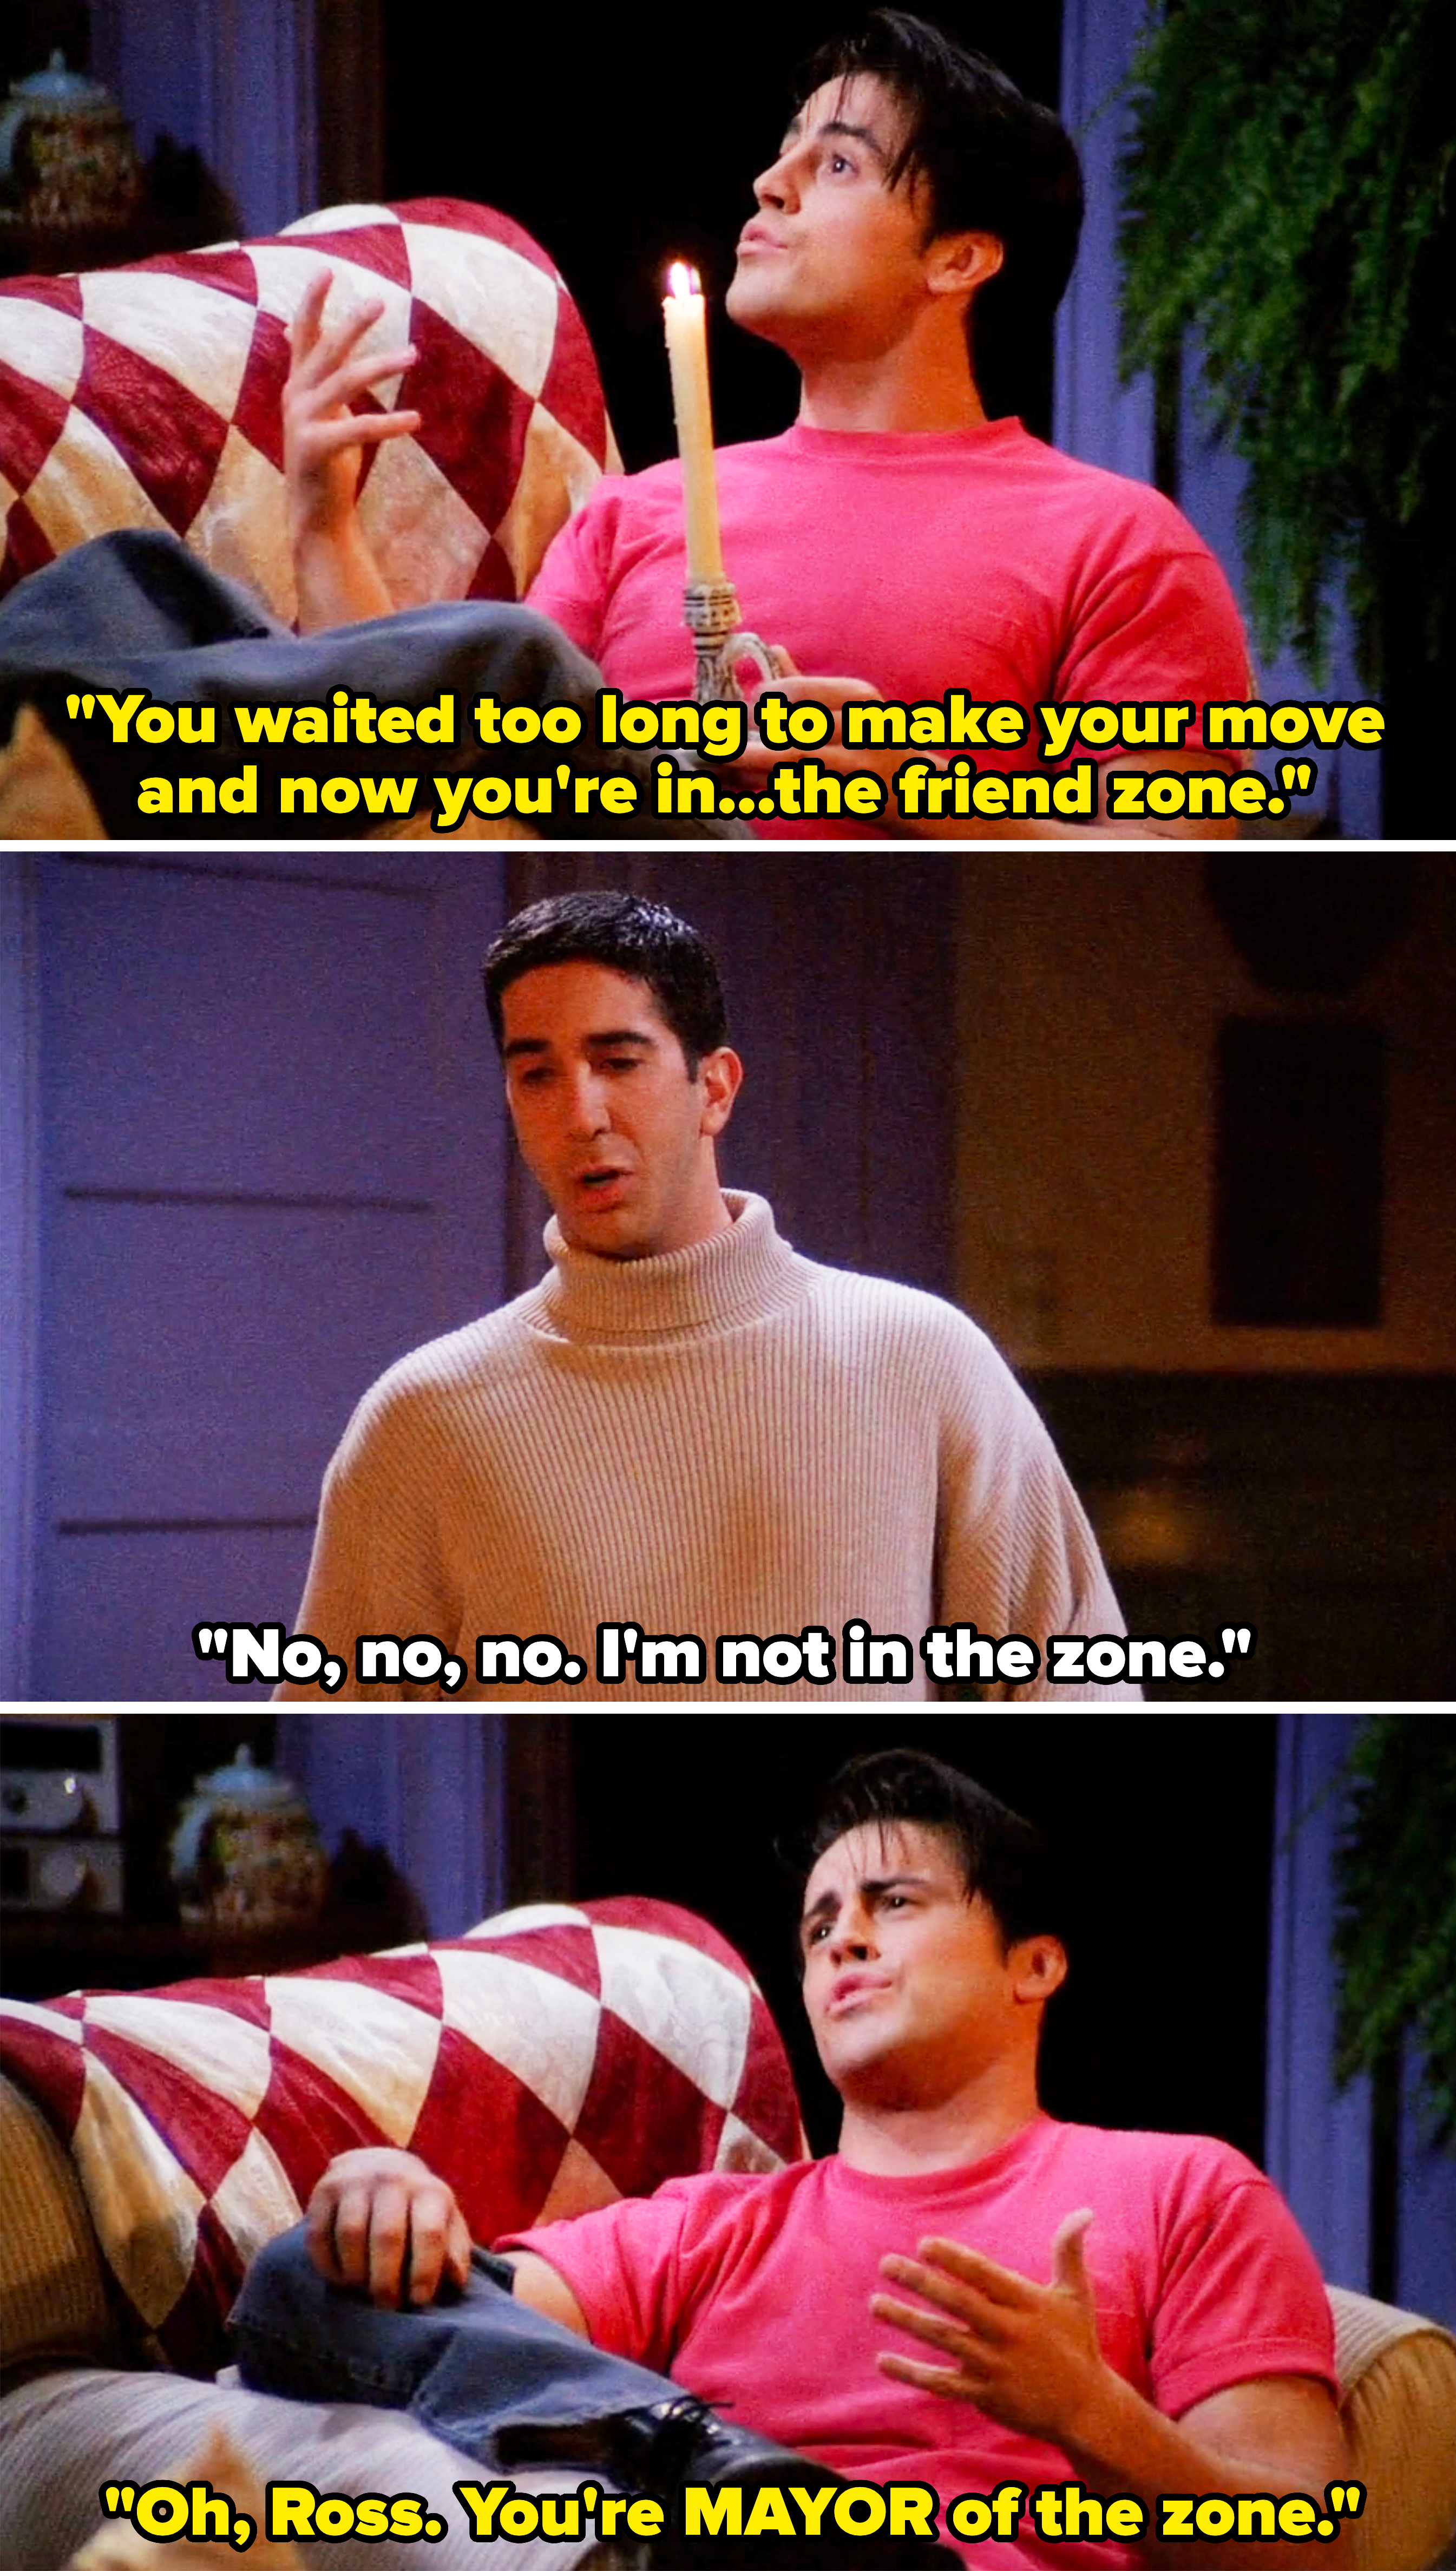 joey telling ross, oh you&#x27;re mayor of the zone